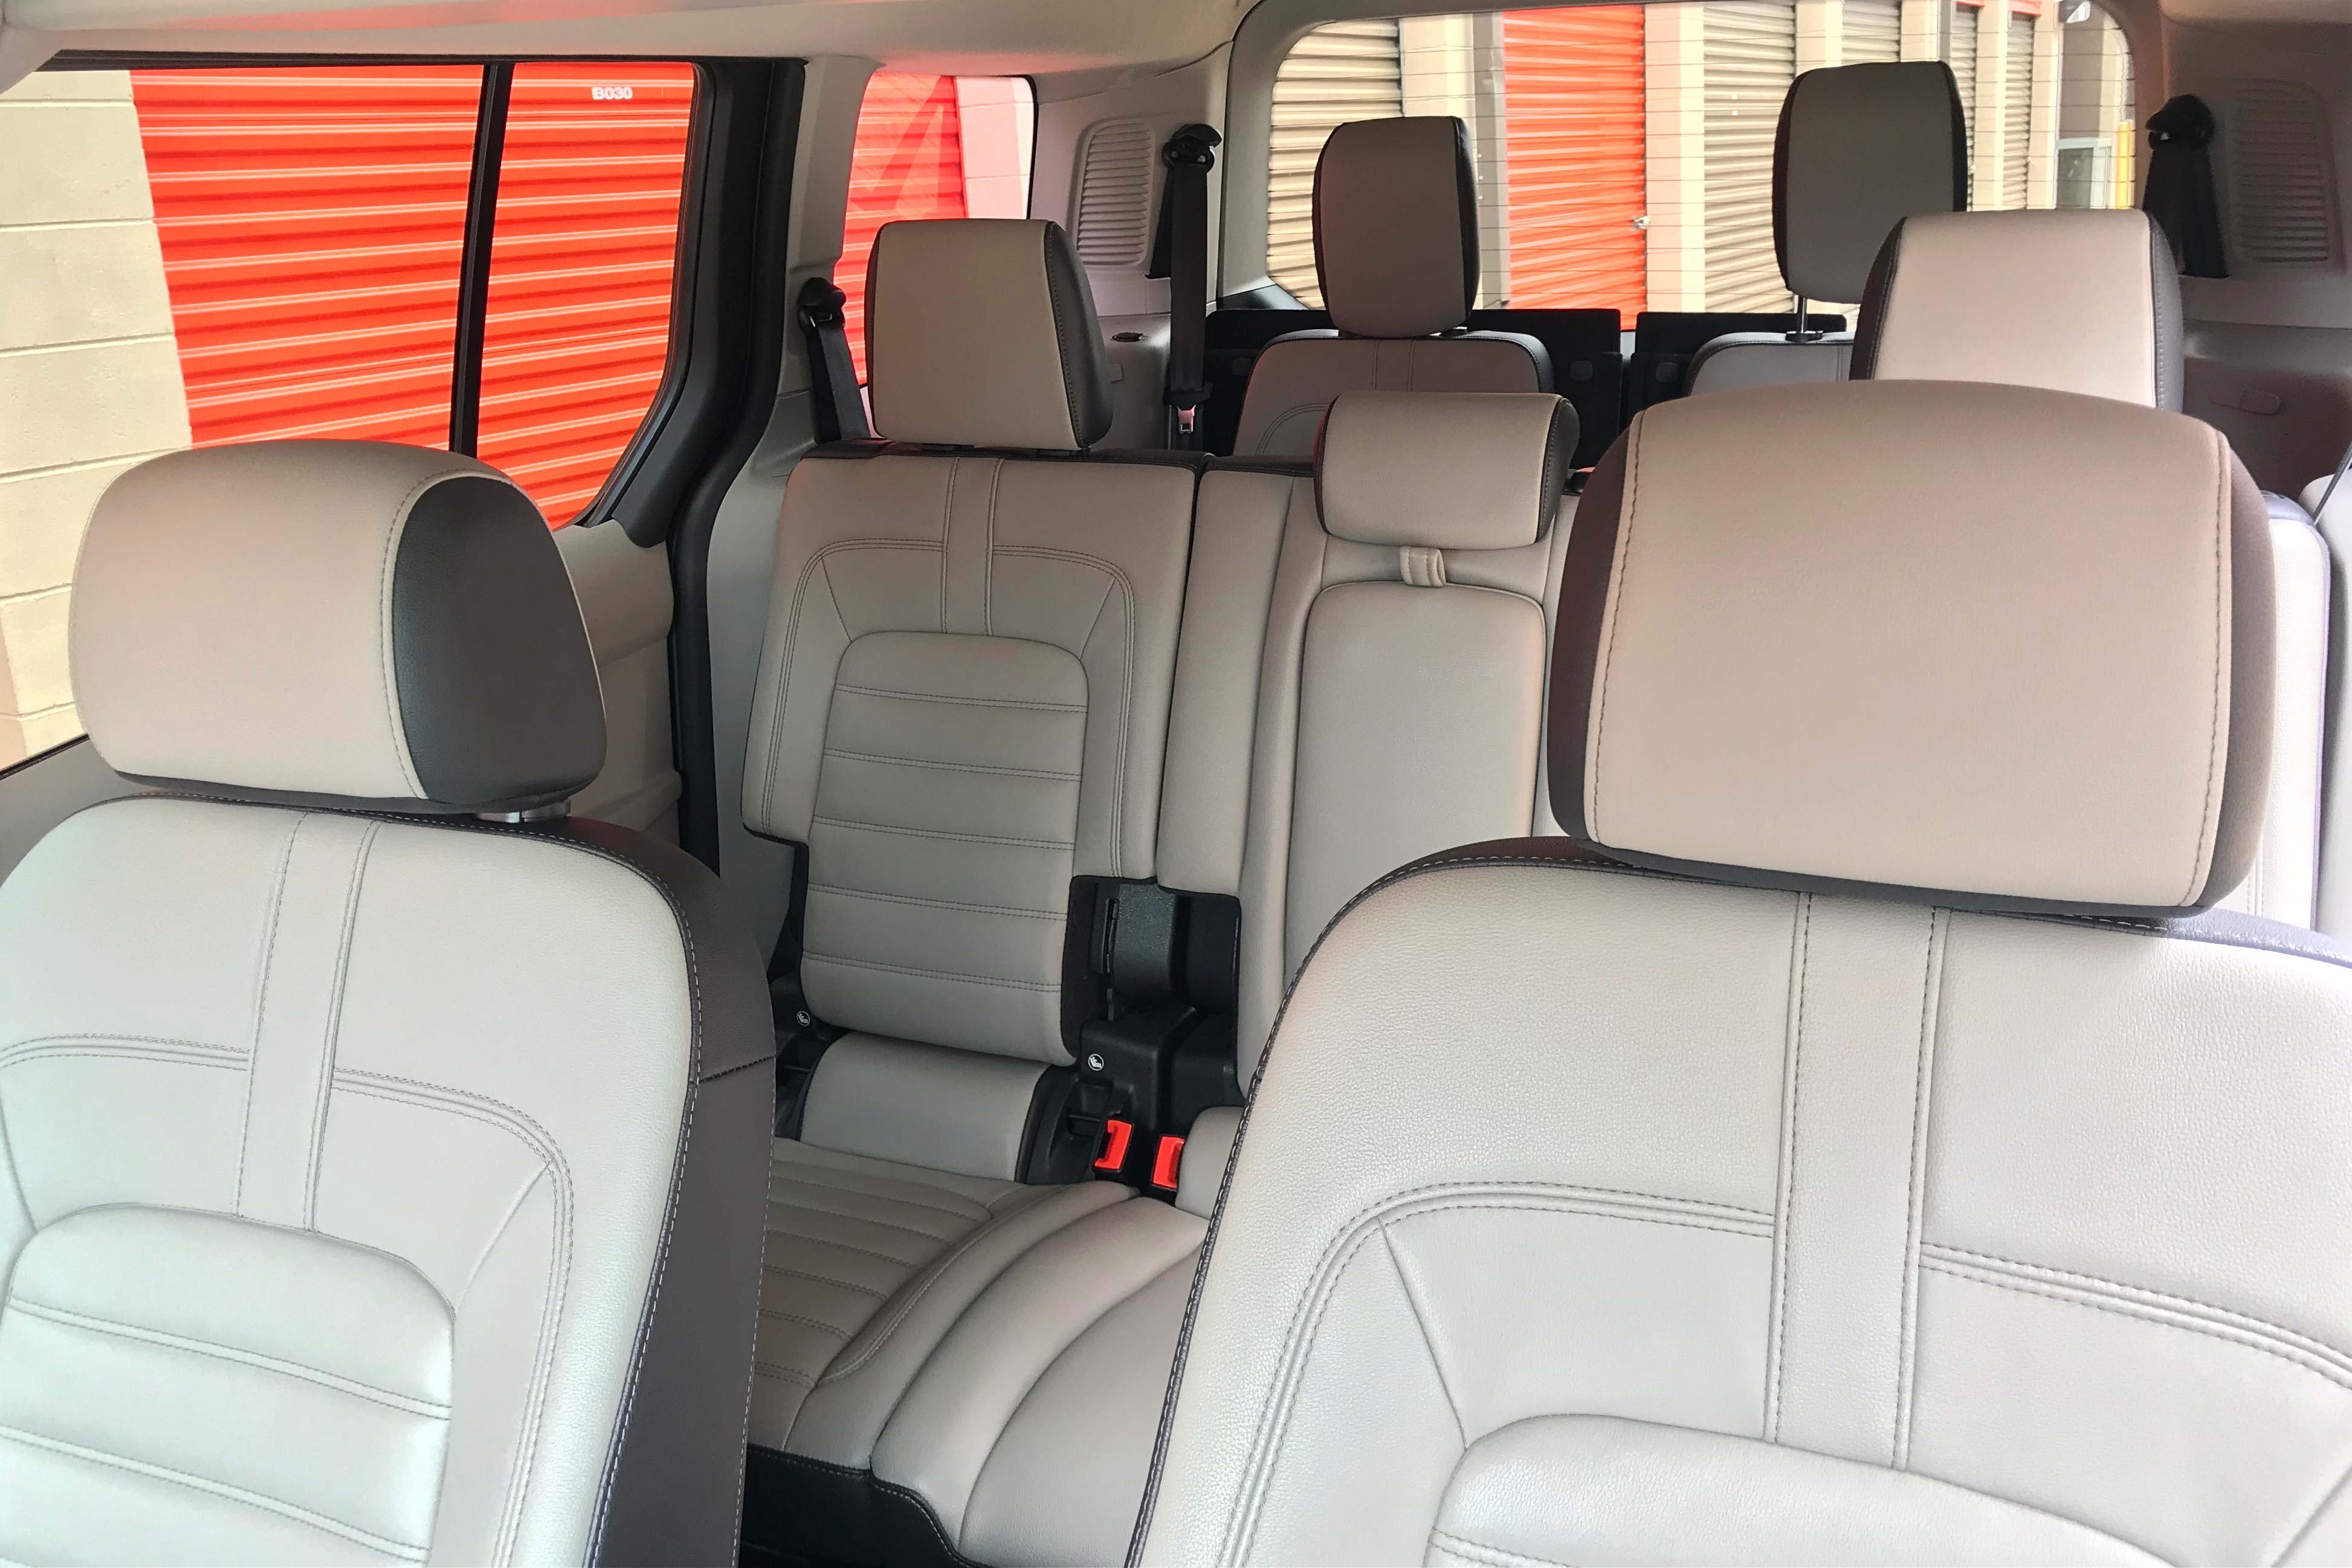 2019 Ford Transit Connect Helps Take Business Ventures to the Next Level